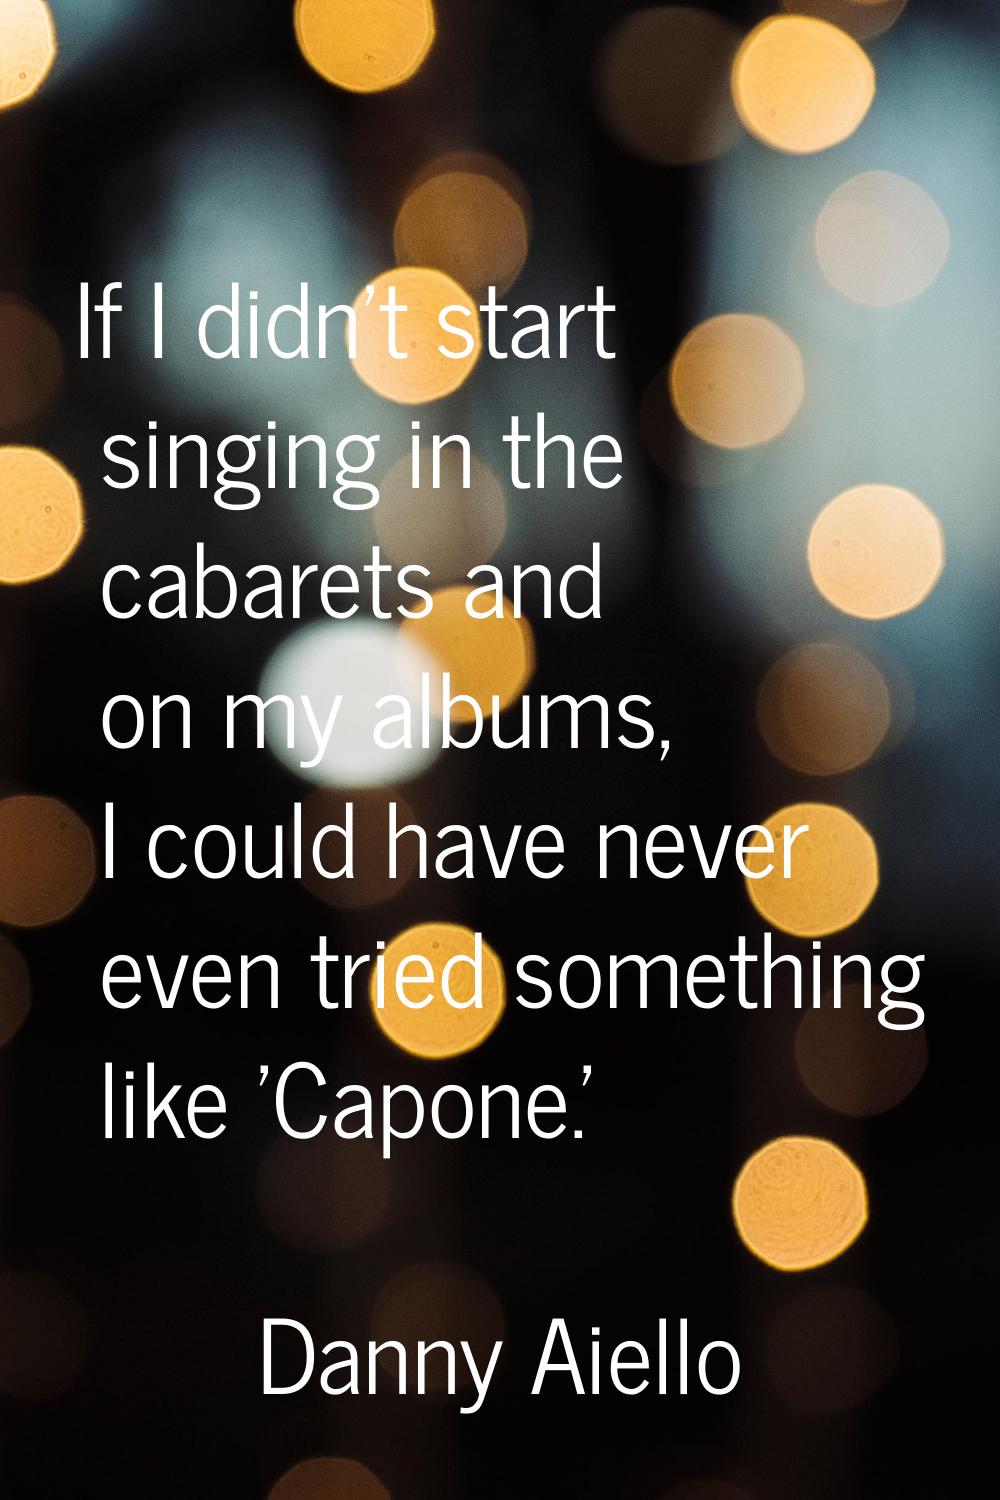 If I didn't start singing in the cabarets and on my albums, I could have never even tried something